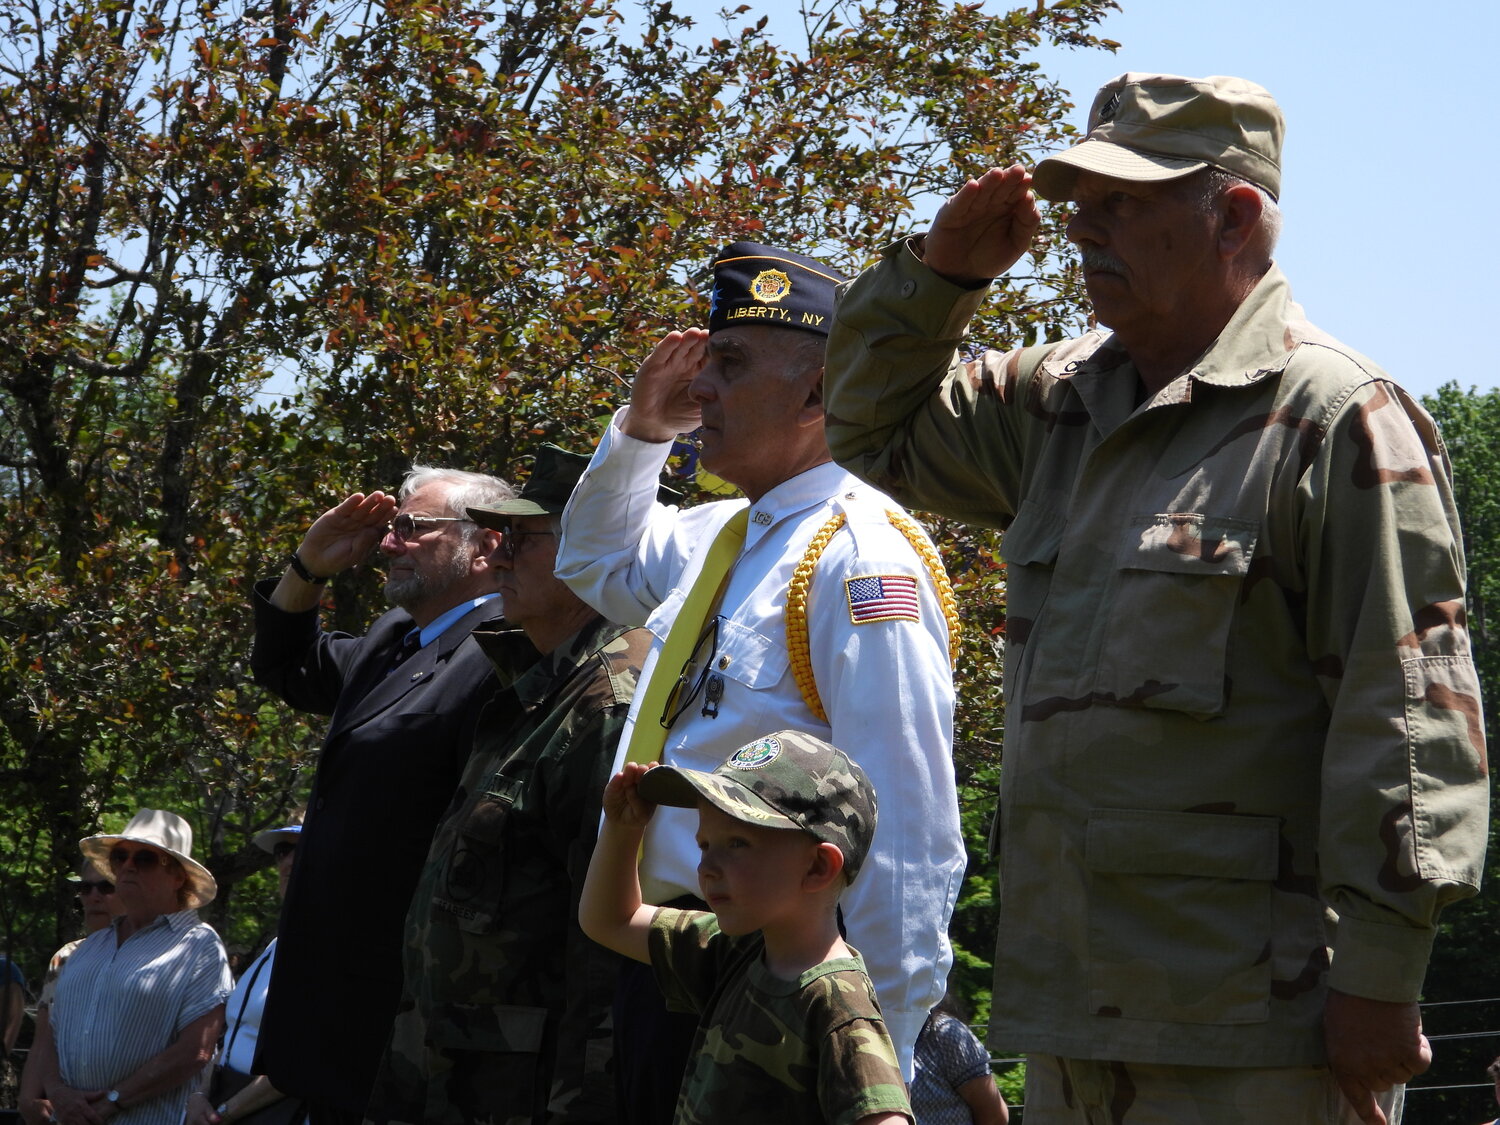 Saluting the honored fallen are, in front, veteran Chris Sutowski and his son, Richard, alongside Rudy Santiago, Alan Wilenken, and Rev. Walter Haff.